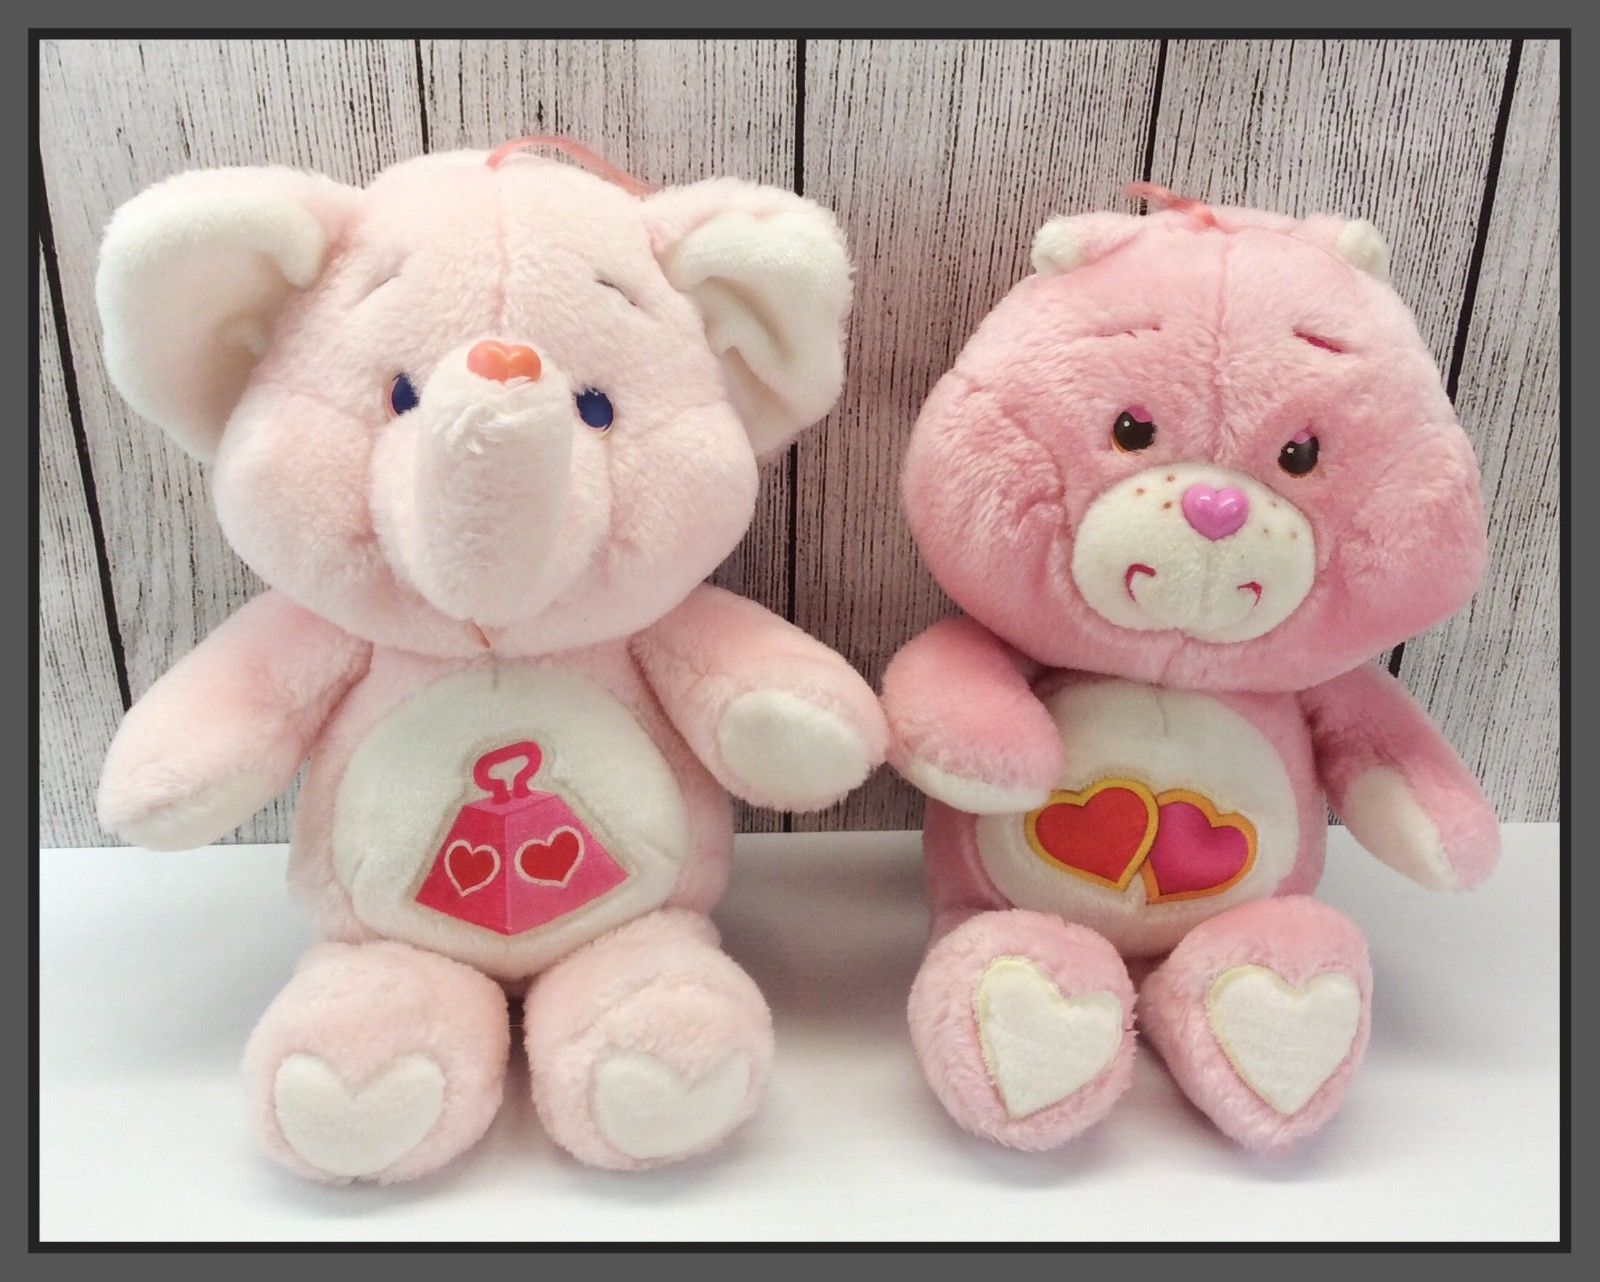 1983 Vintage Kenner Care Bears LOTS A HEART & LOVE A LOT Full Size Plush Animals